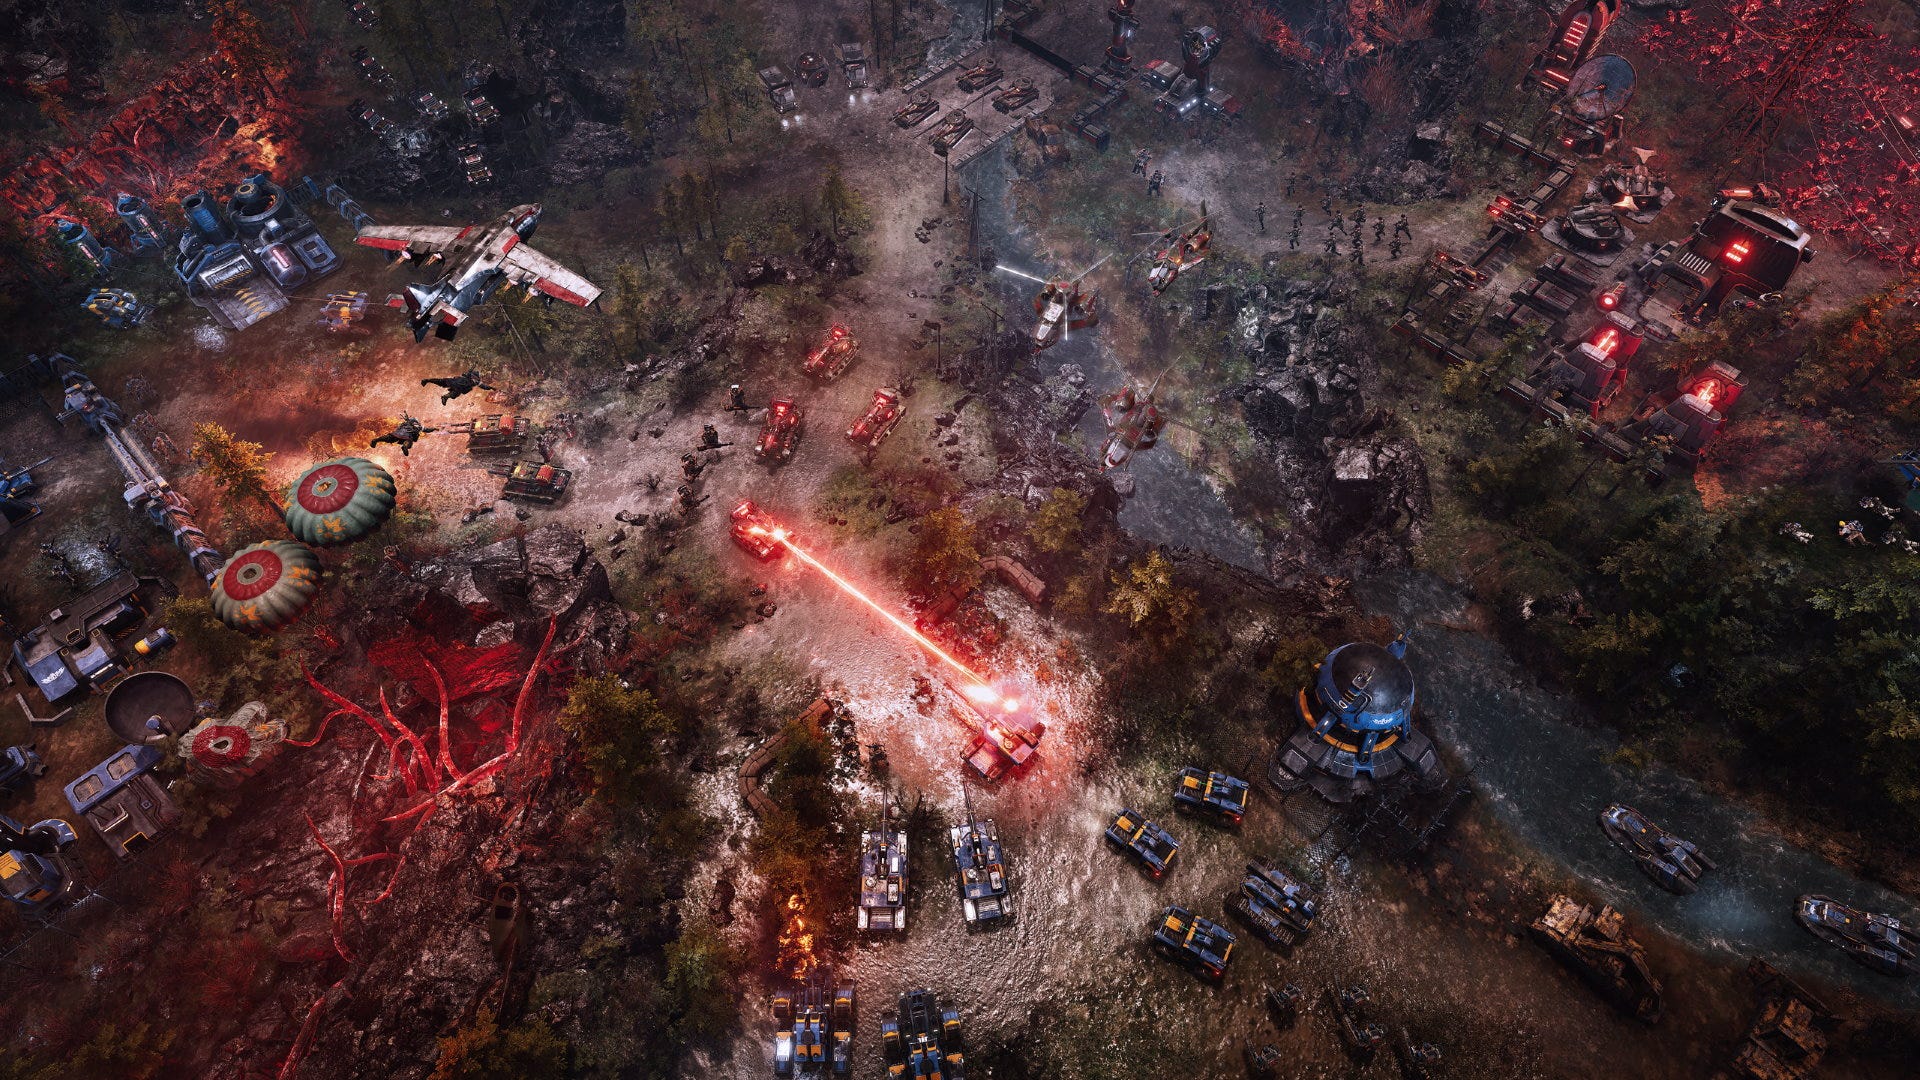 Relive your Command & Conquer glory days with the free demo for Tempest Rising